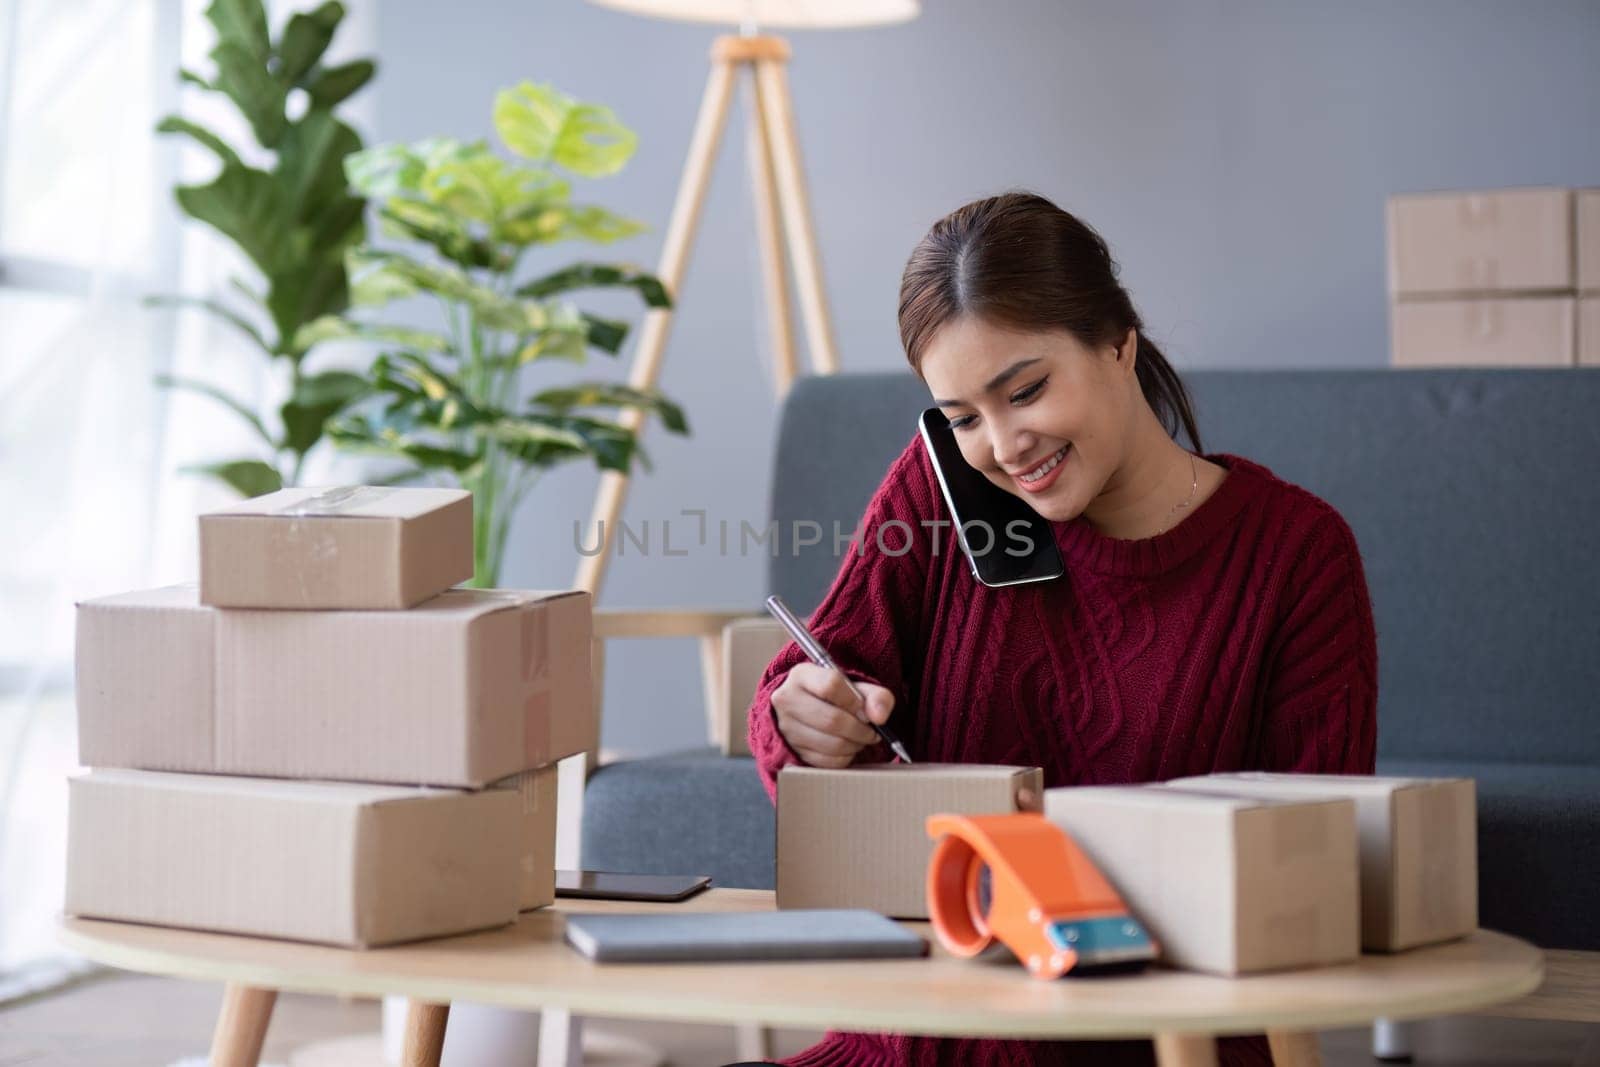 A small SME business owner receives product orders and writes shipping information on cardboard boxes in the home office to prepare for delivery..